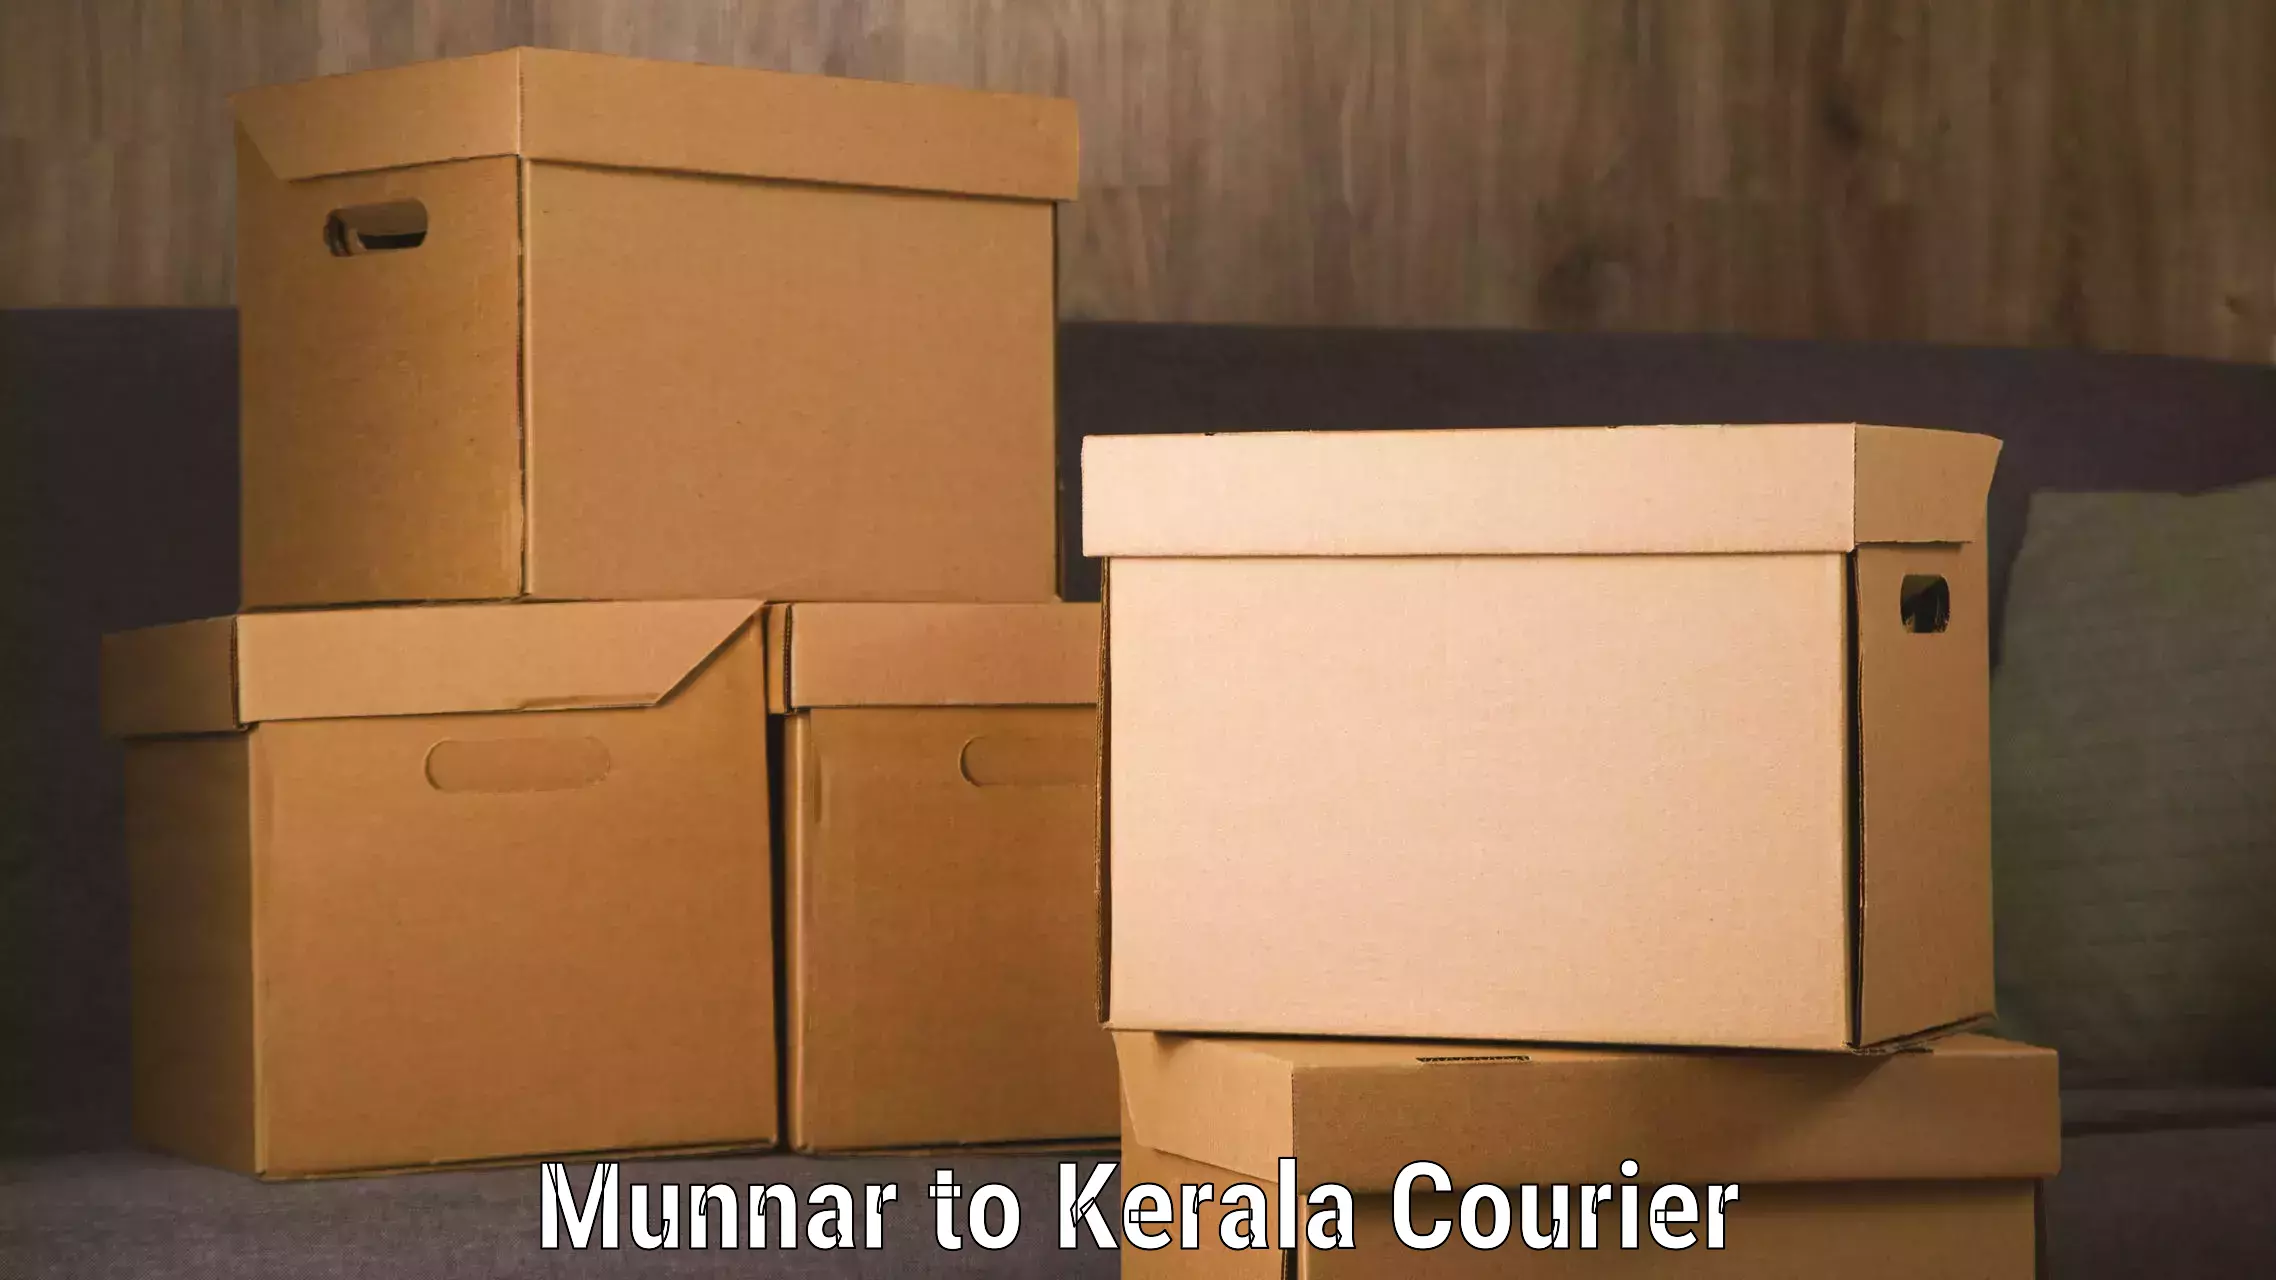 24-hour courier service Munnar to Kottayam